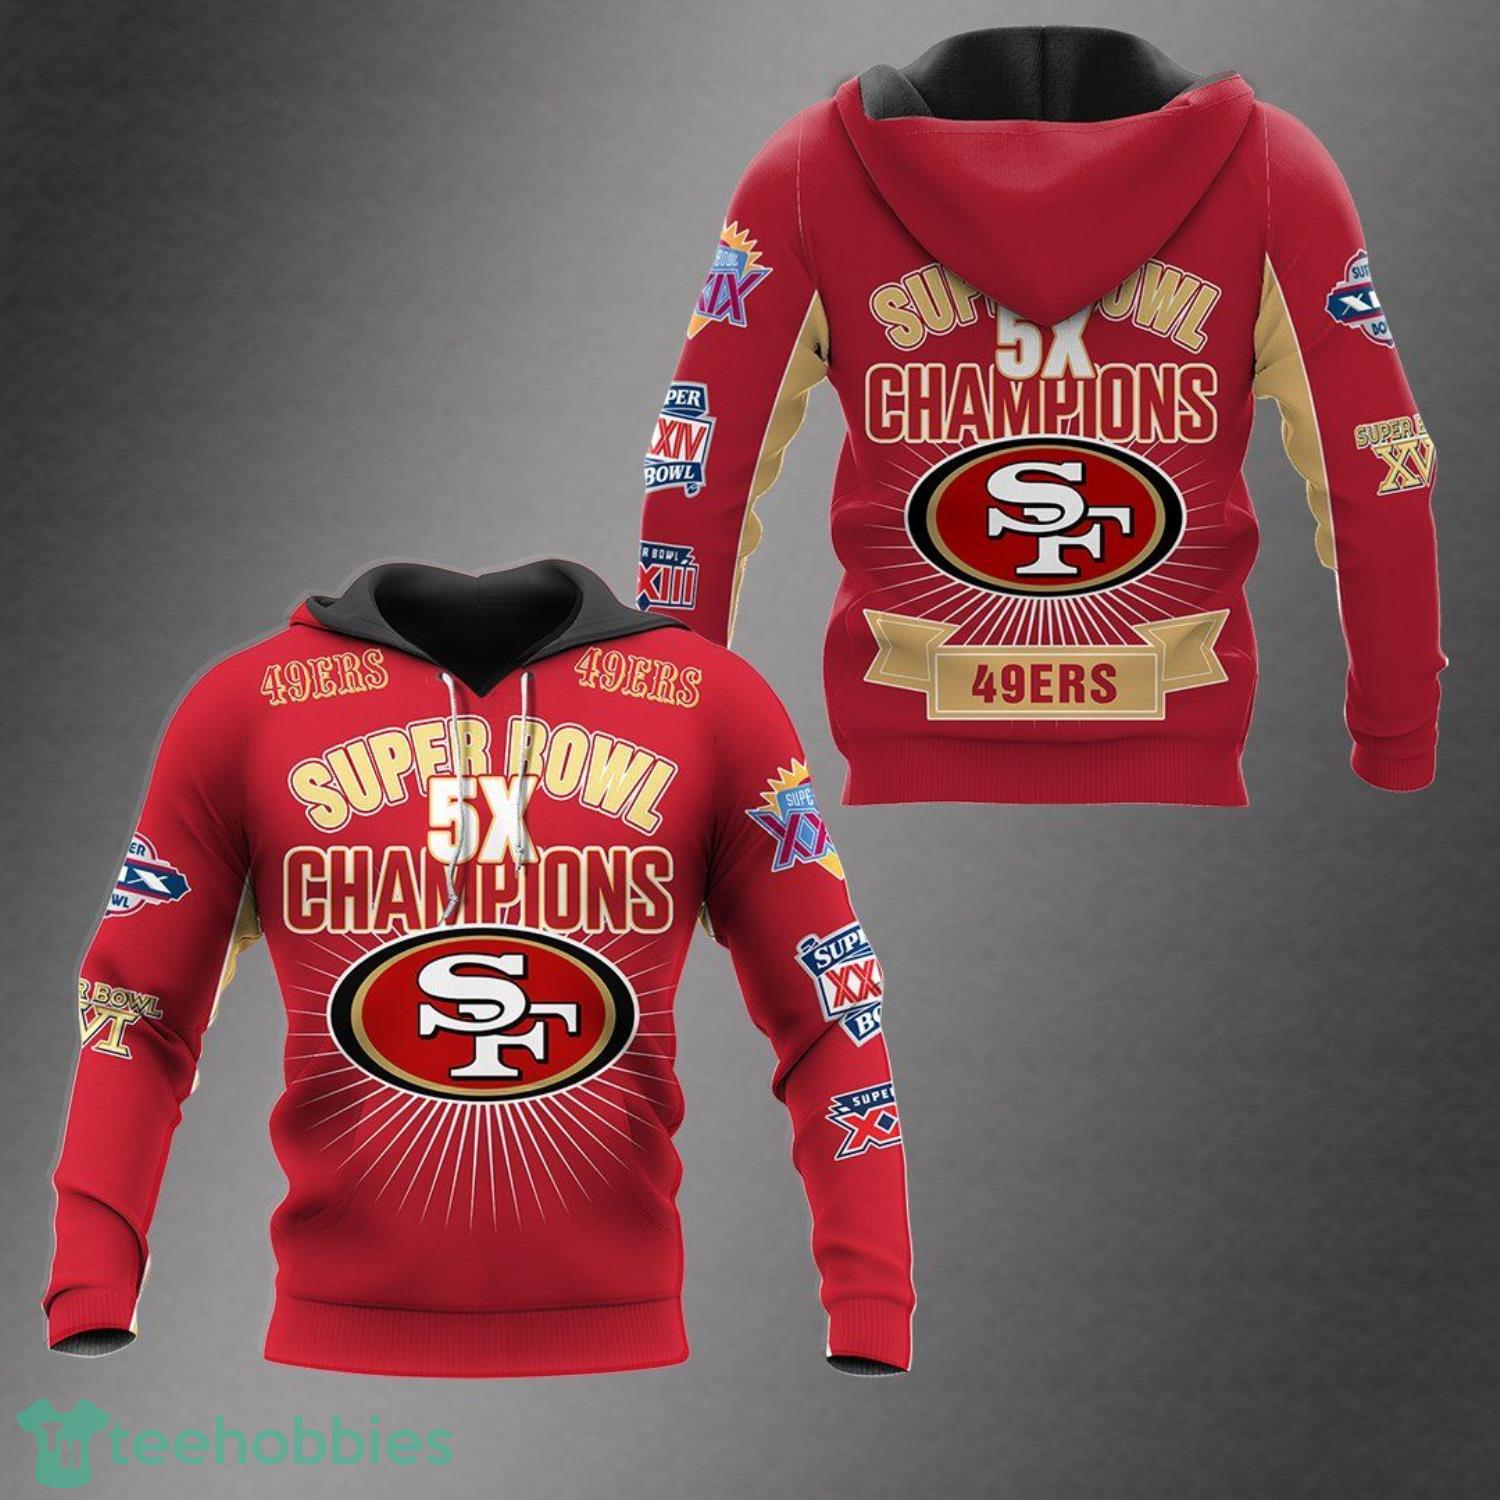 San Francisco Champions Hoodie Zip Hoodie For Fans - b078457a62a6a6fba2bb787f16d87843